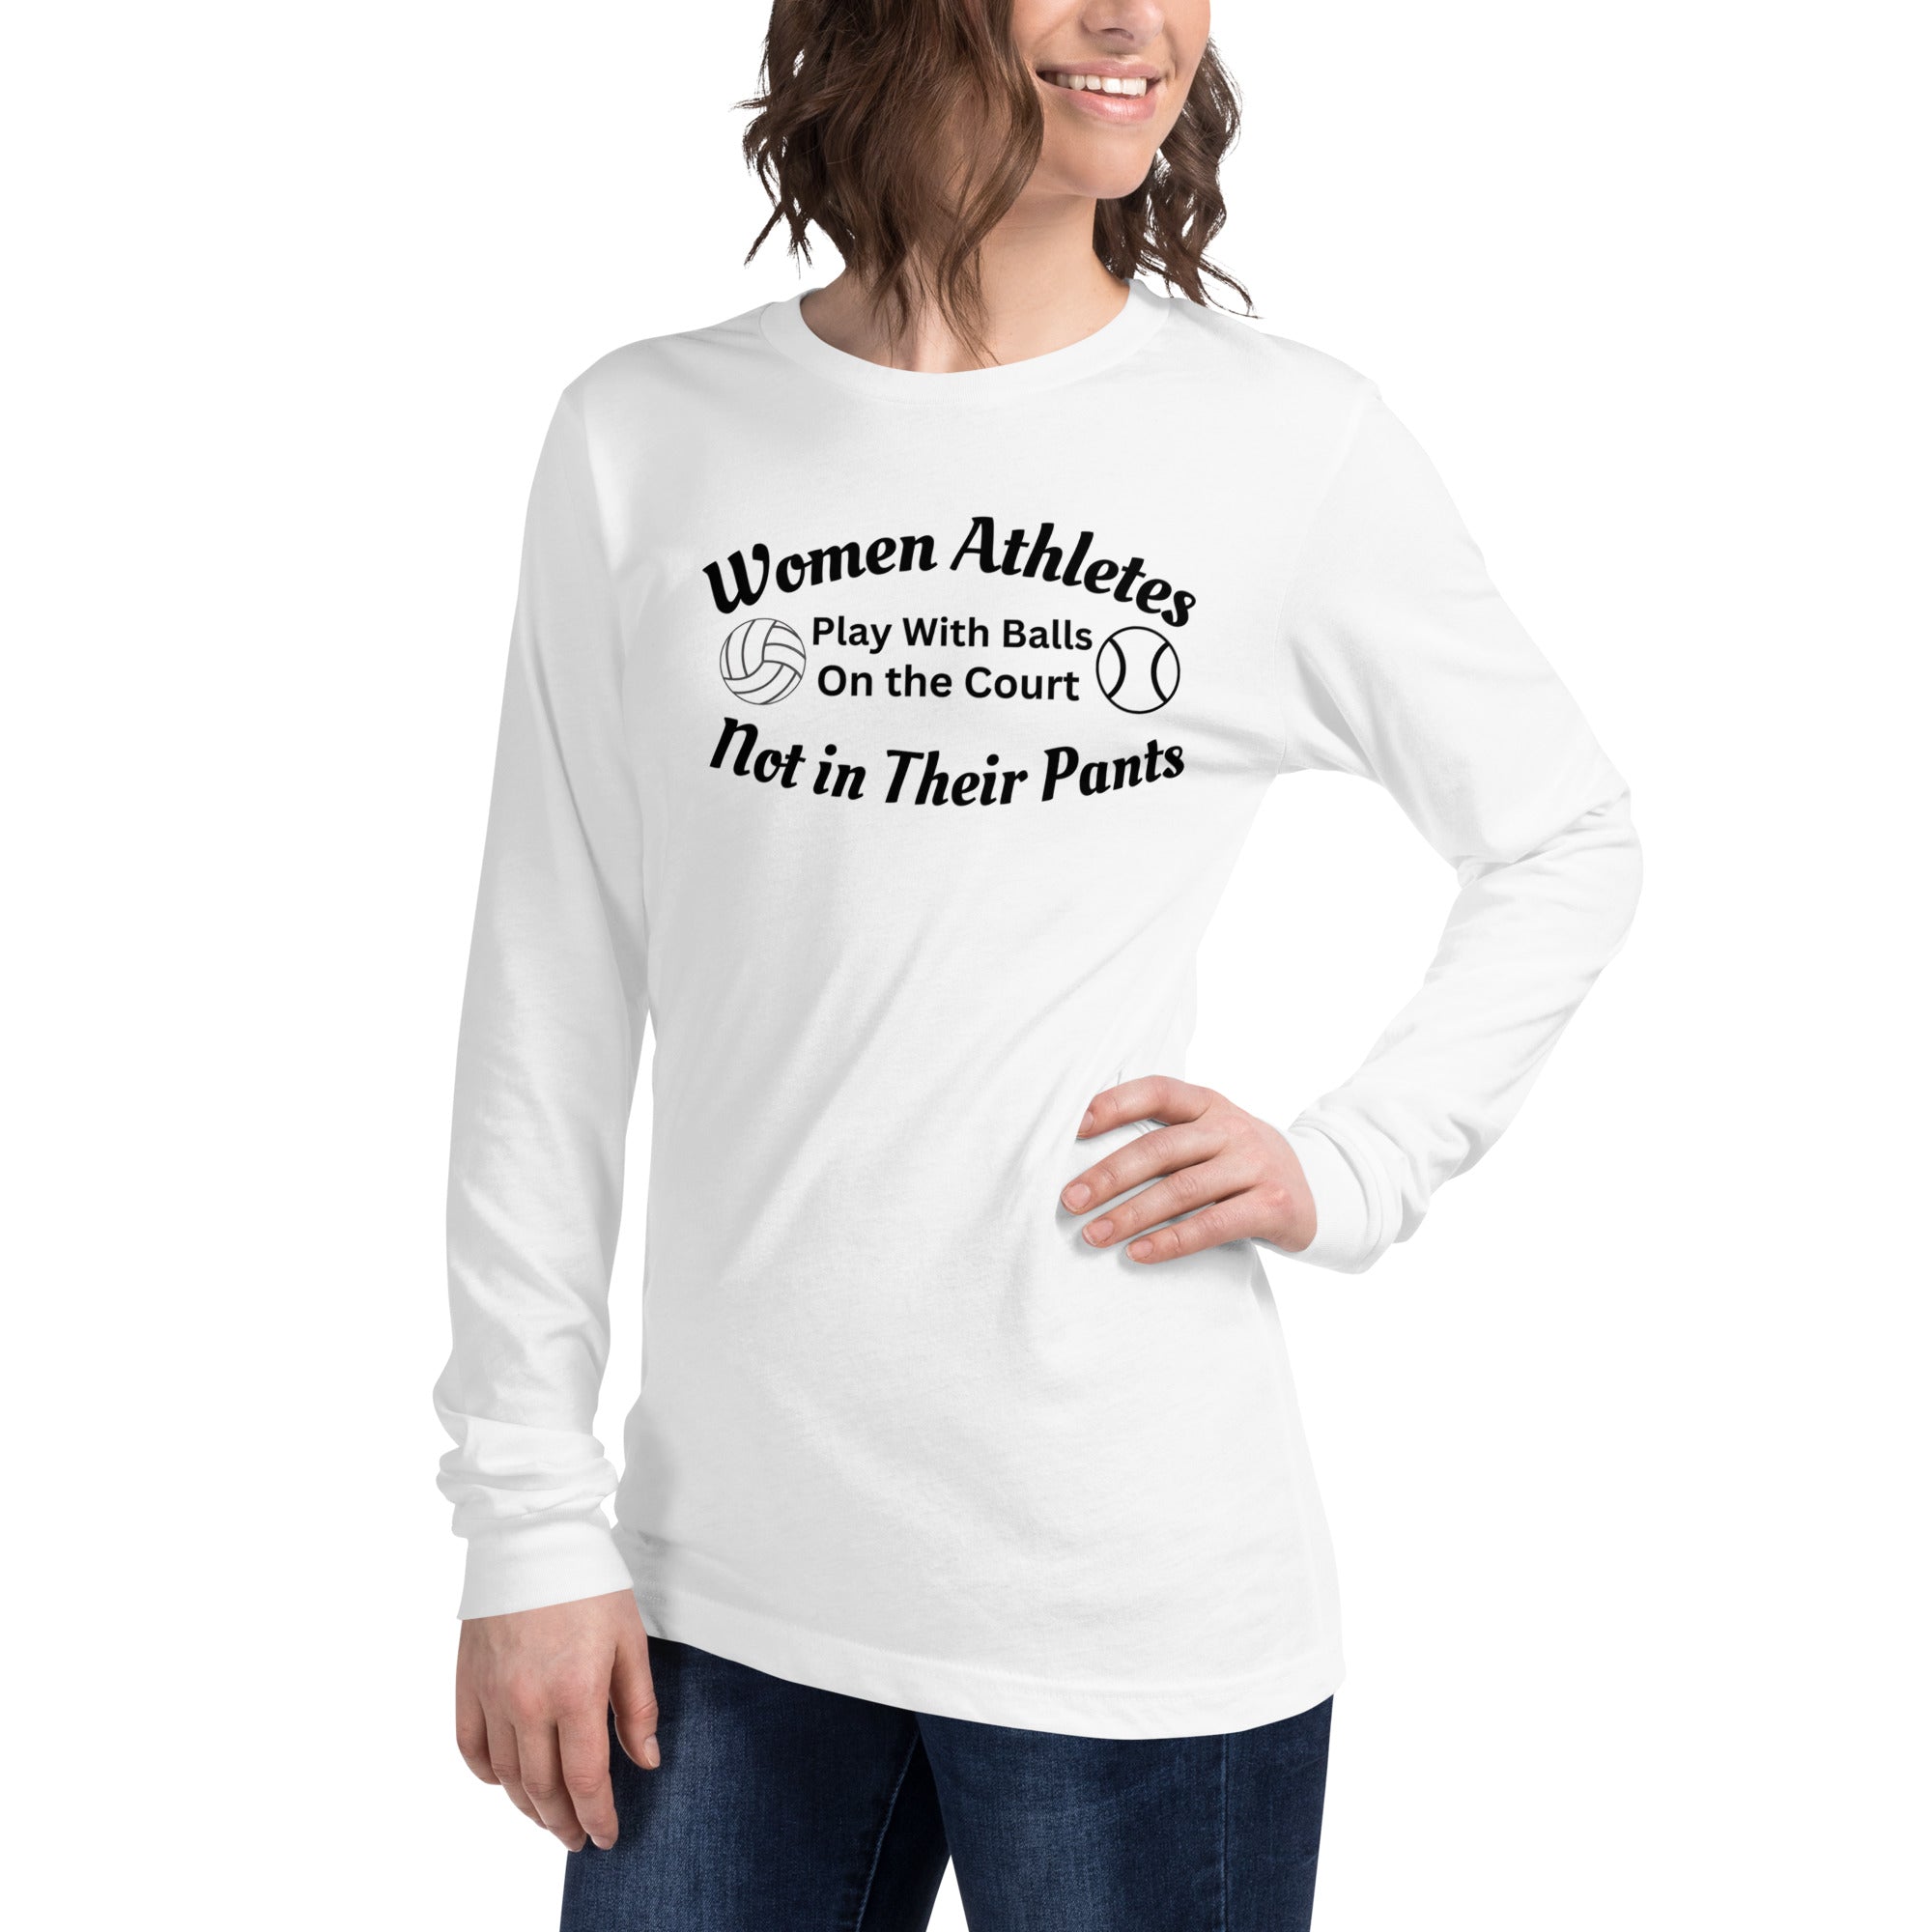 Protect Women's Sports Balls on the Court Not in their Pants Long Sleeve Shirt